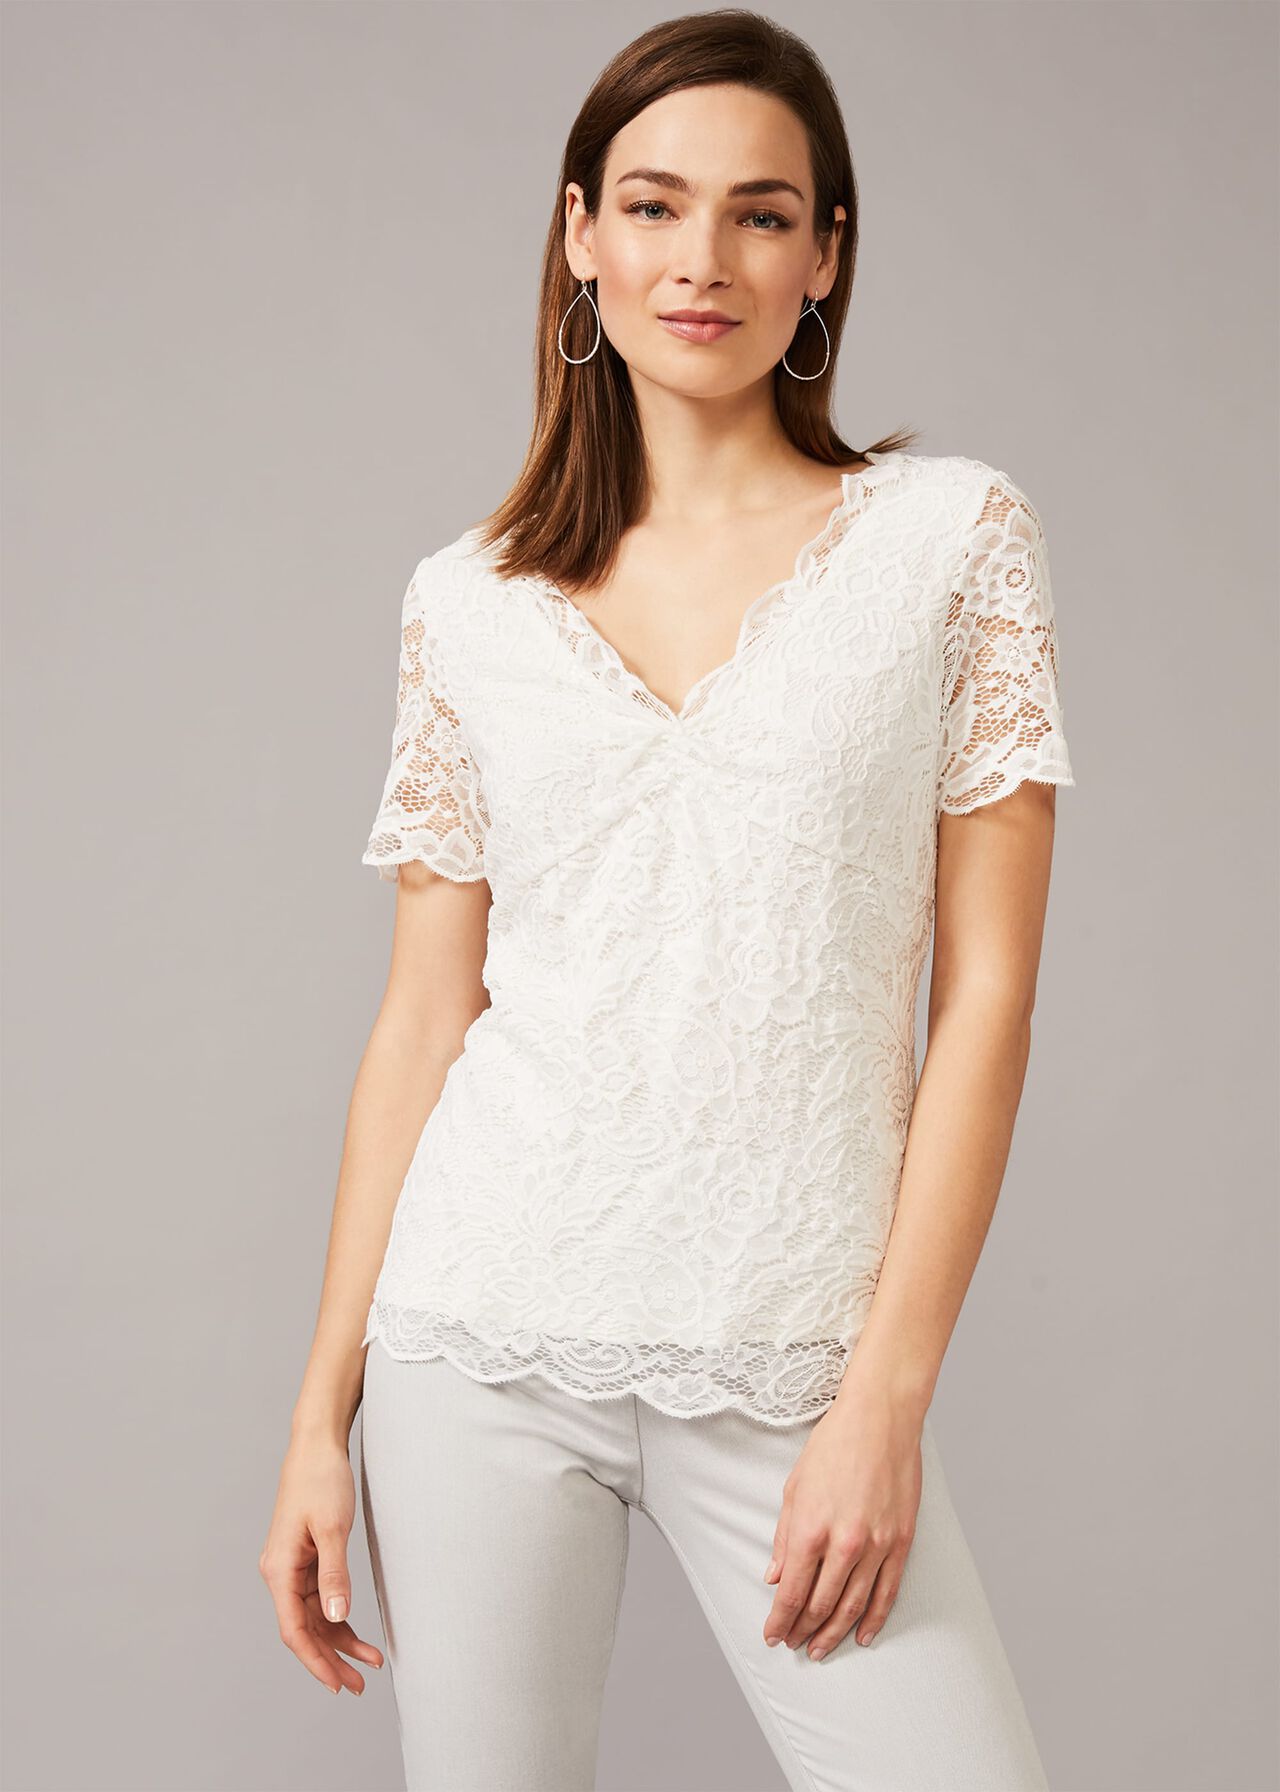 Brynlee Lace Top | Phase Eight